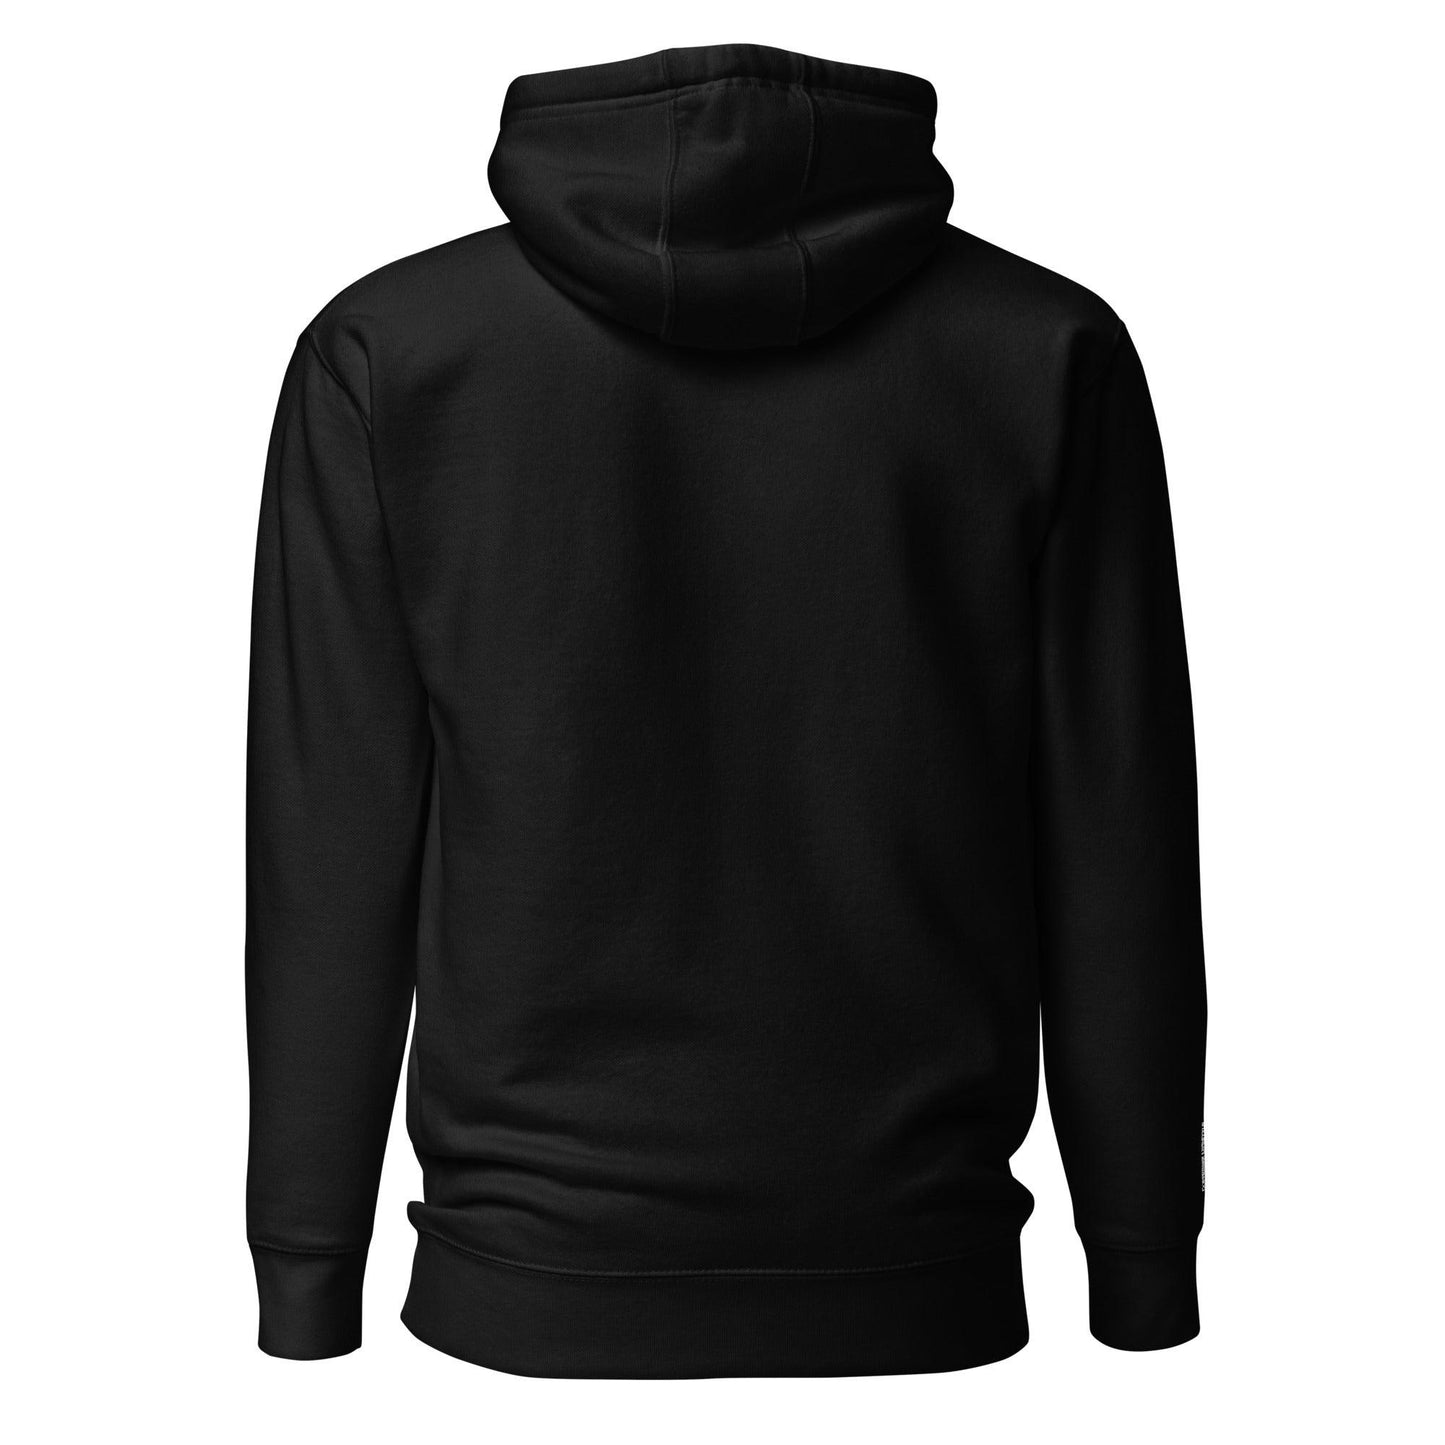 Embroidery Unisex Hoodie Athleisure - COFFEEBRE